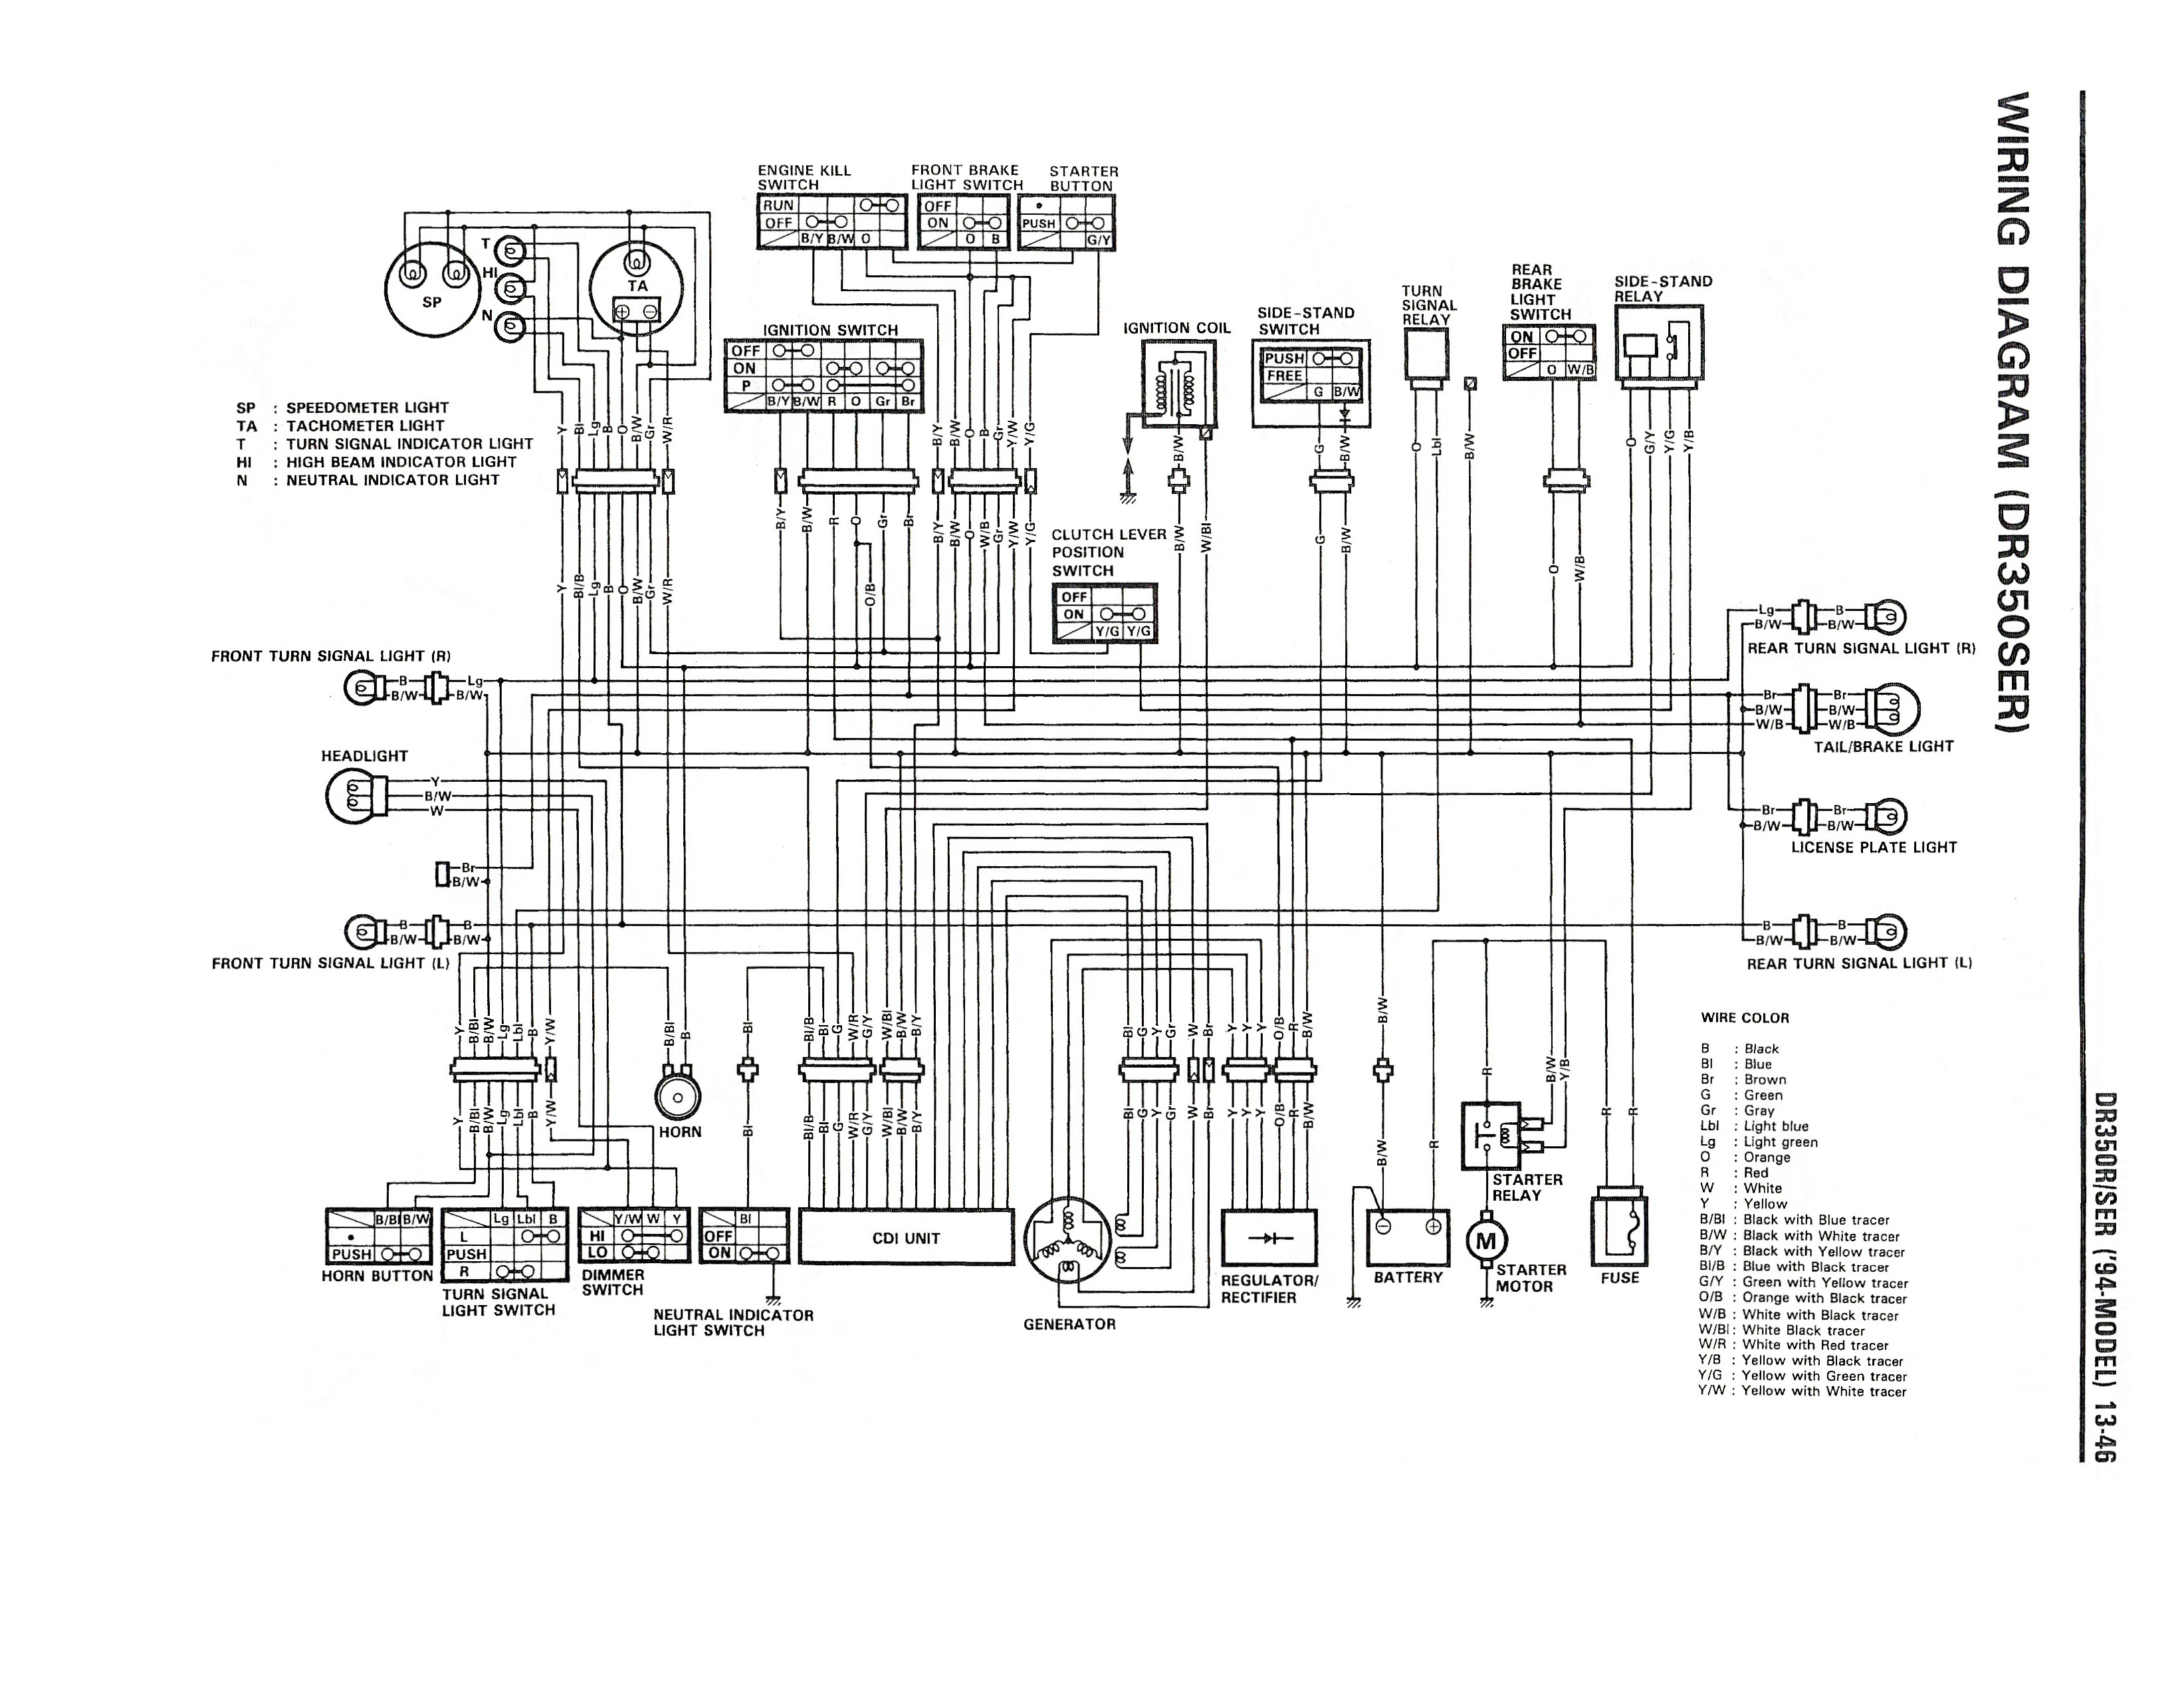 Wiring Diagram For The Dr350 Se (1994 And Later Models) - Suzuki - Wiring Diagram For A